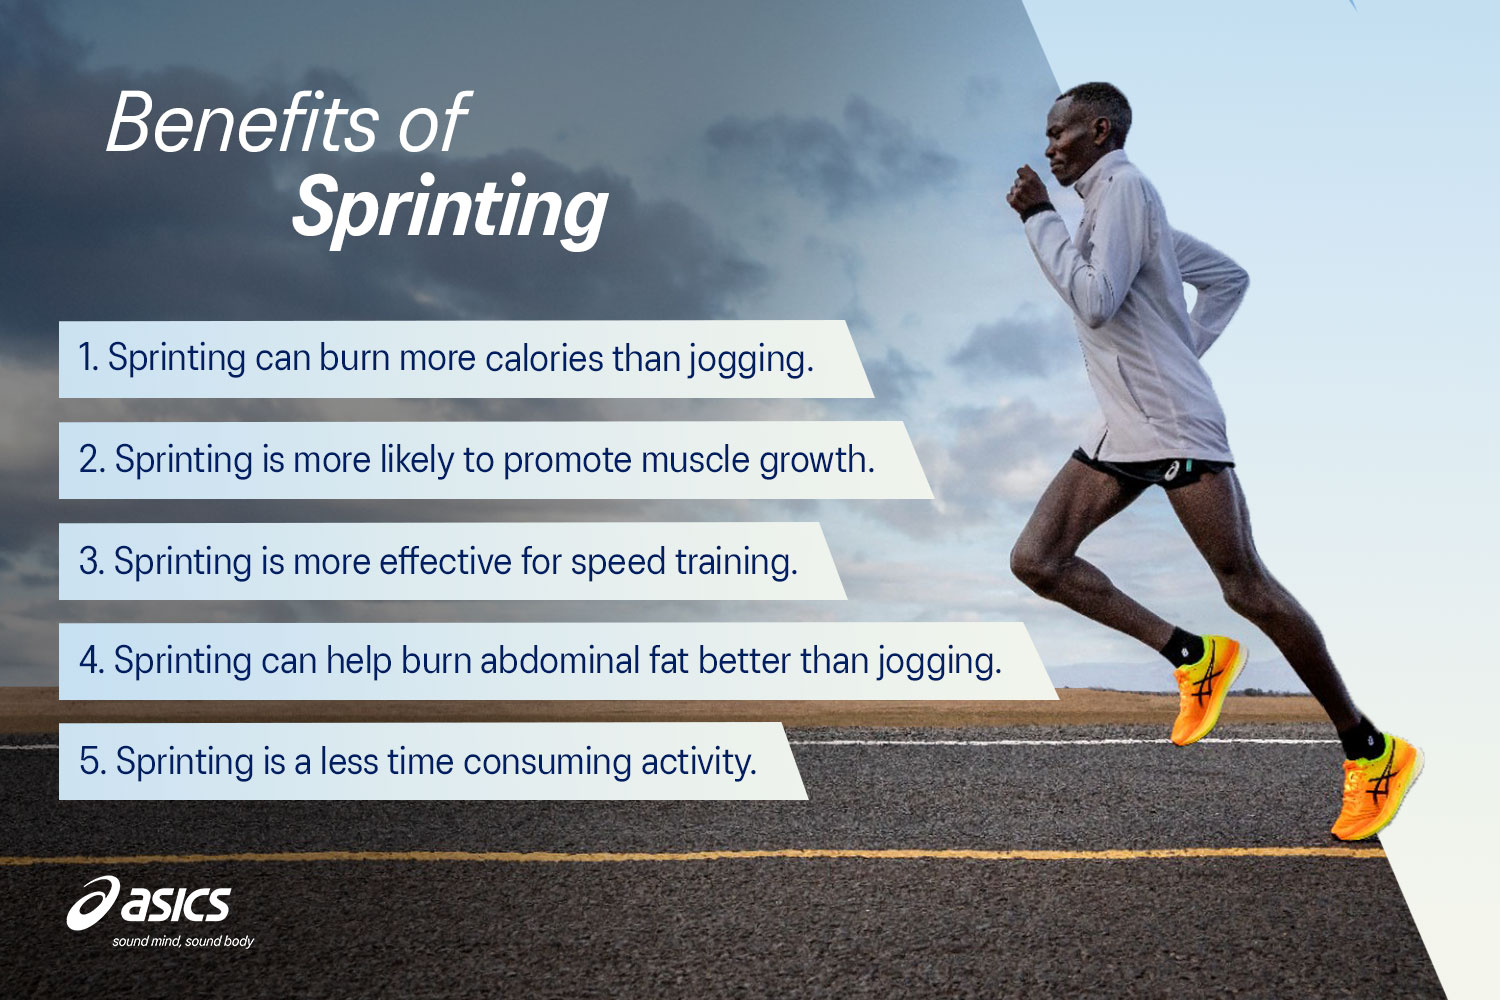 10 Sprint Workouts to Make You Faster - Best Speed Running Plans